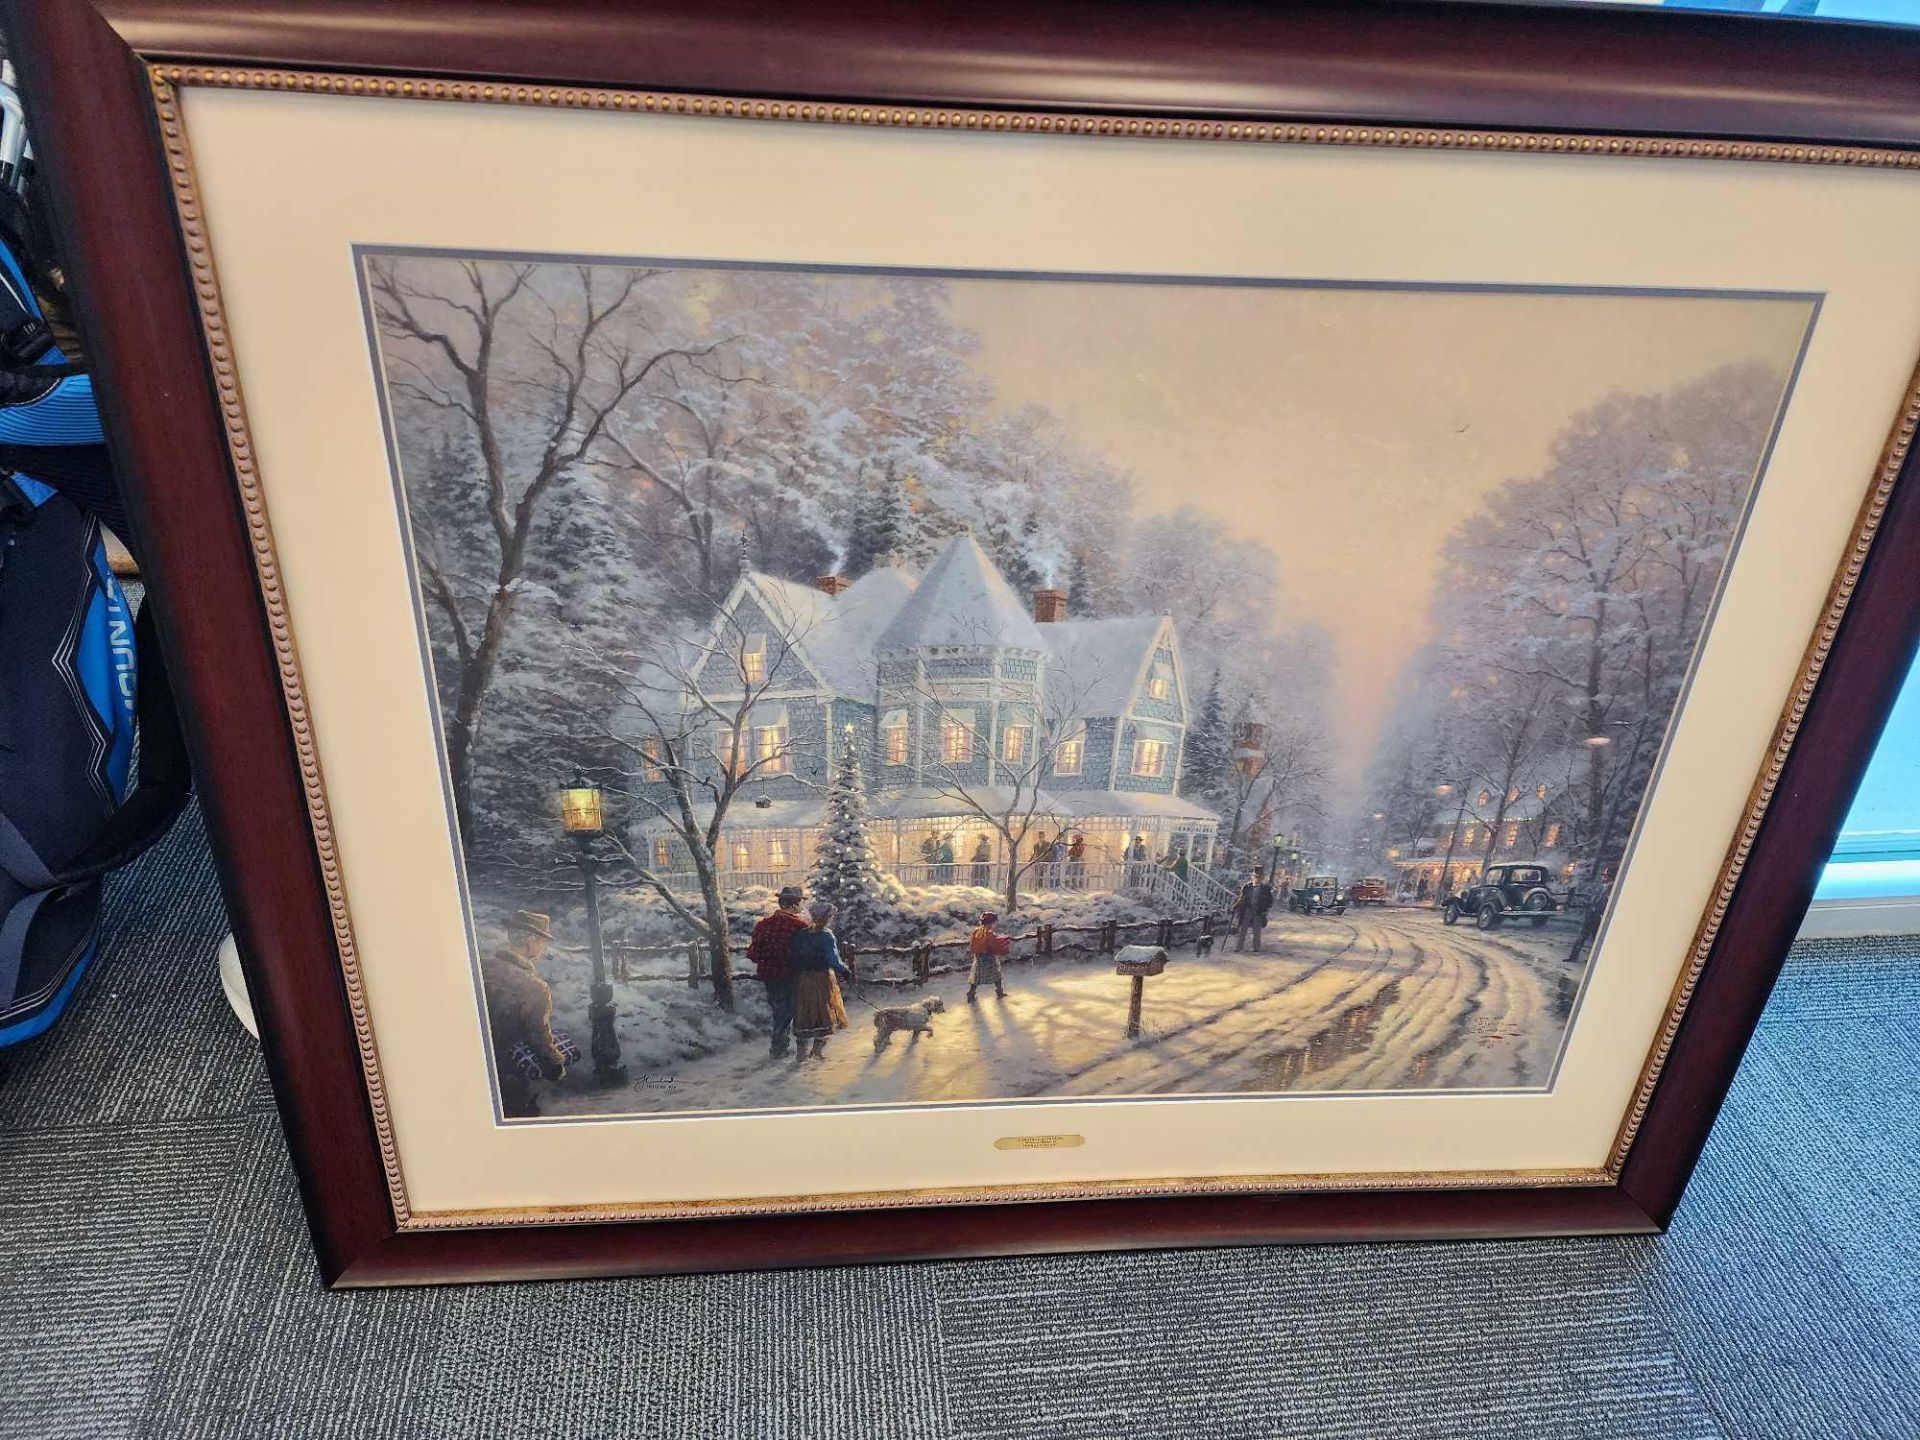 A Holiday Gathering by Thomas Kinkade 25x34. with frame and certificate - Image 6 of 6